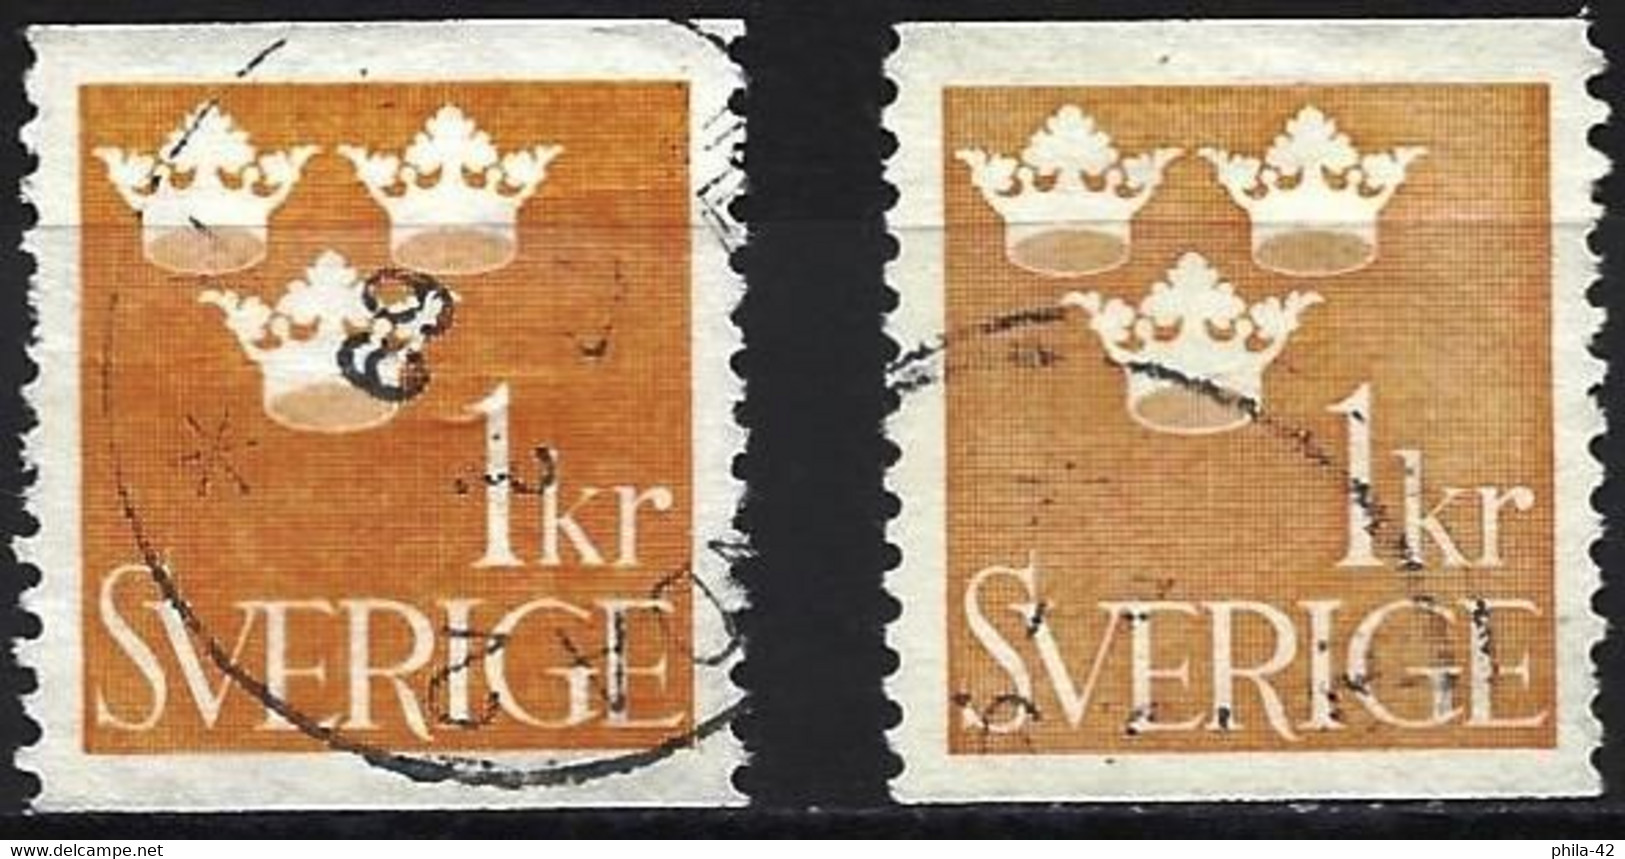 Sweden 1939 - Mi 268A - YT 269 ( Three Crowns ) Two Shades Od Color - Errors, Freaks & Oddities (EFO)